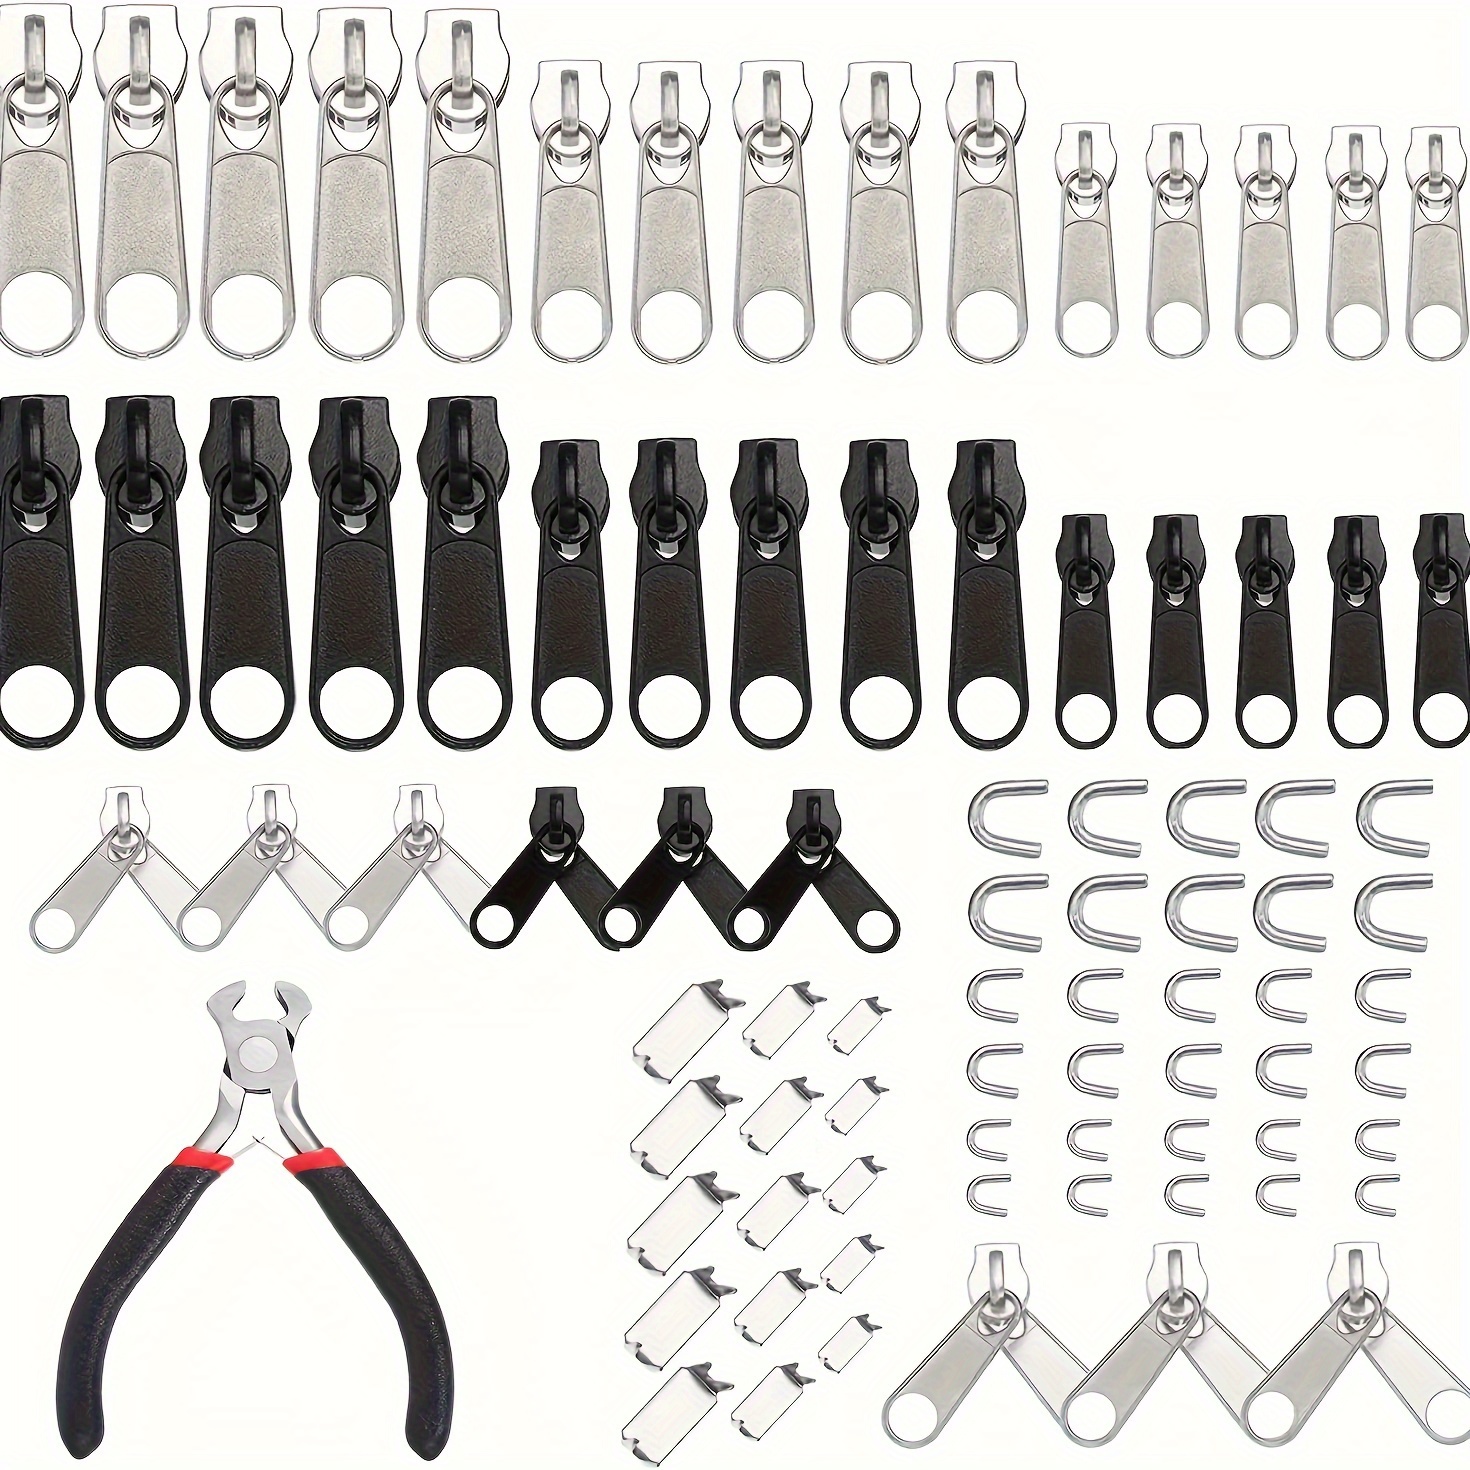 Zipper Repair Kit with Replacement Zippers [197pcs] Zipper Fix Kit & Replacement Zipper Slider Set with Pliers - Ideal for Fixing Luggage, Coats, Jean